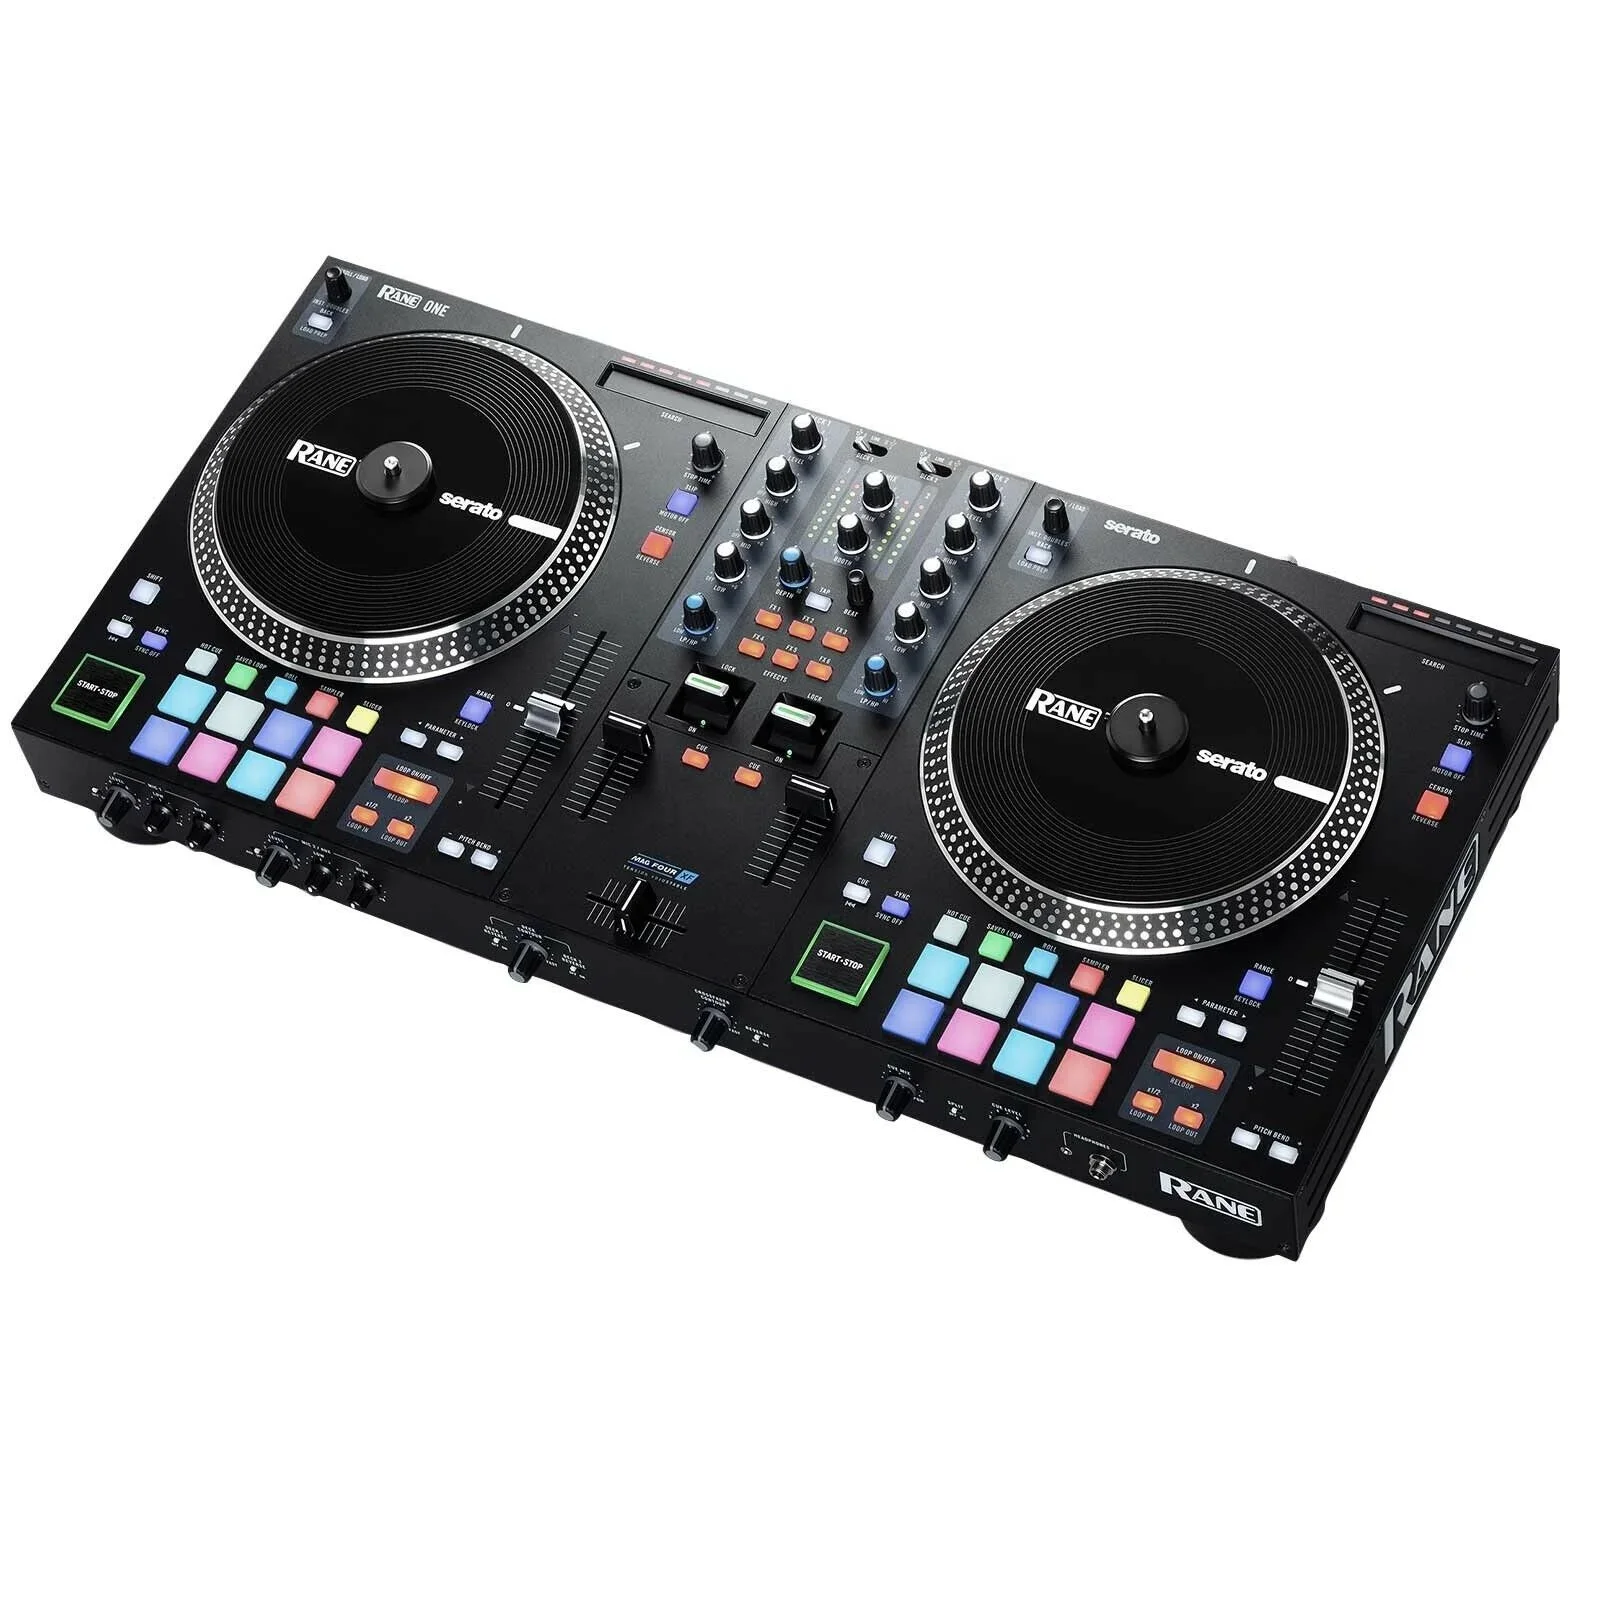 

SPRING SALES DISCOUNT ON Buy With Confidence New Rane ONE 2 Channel Pro 7" Motorized Turntable Style Decks DJ Controller W Case